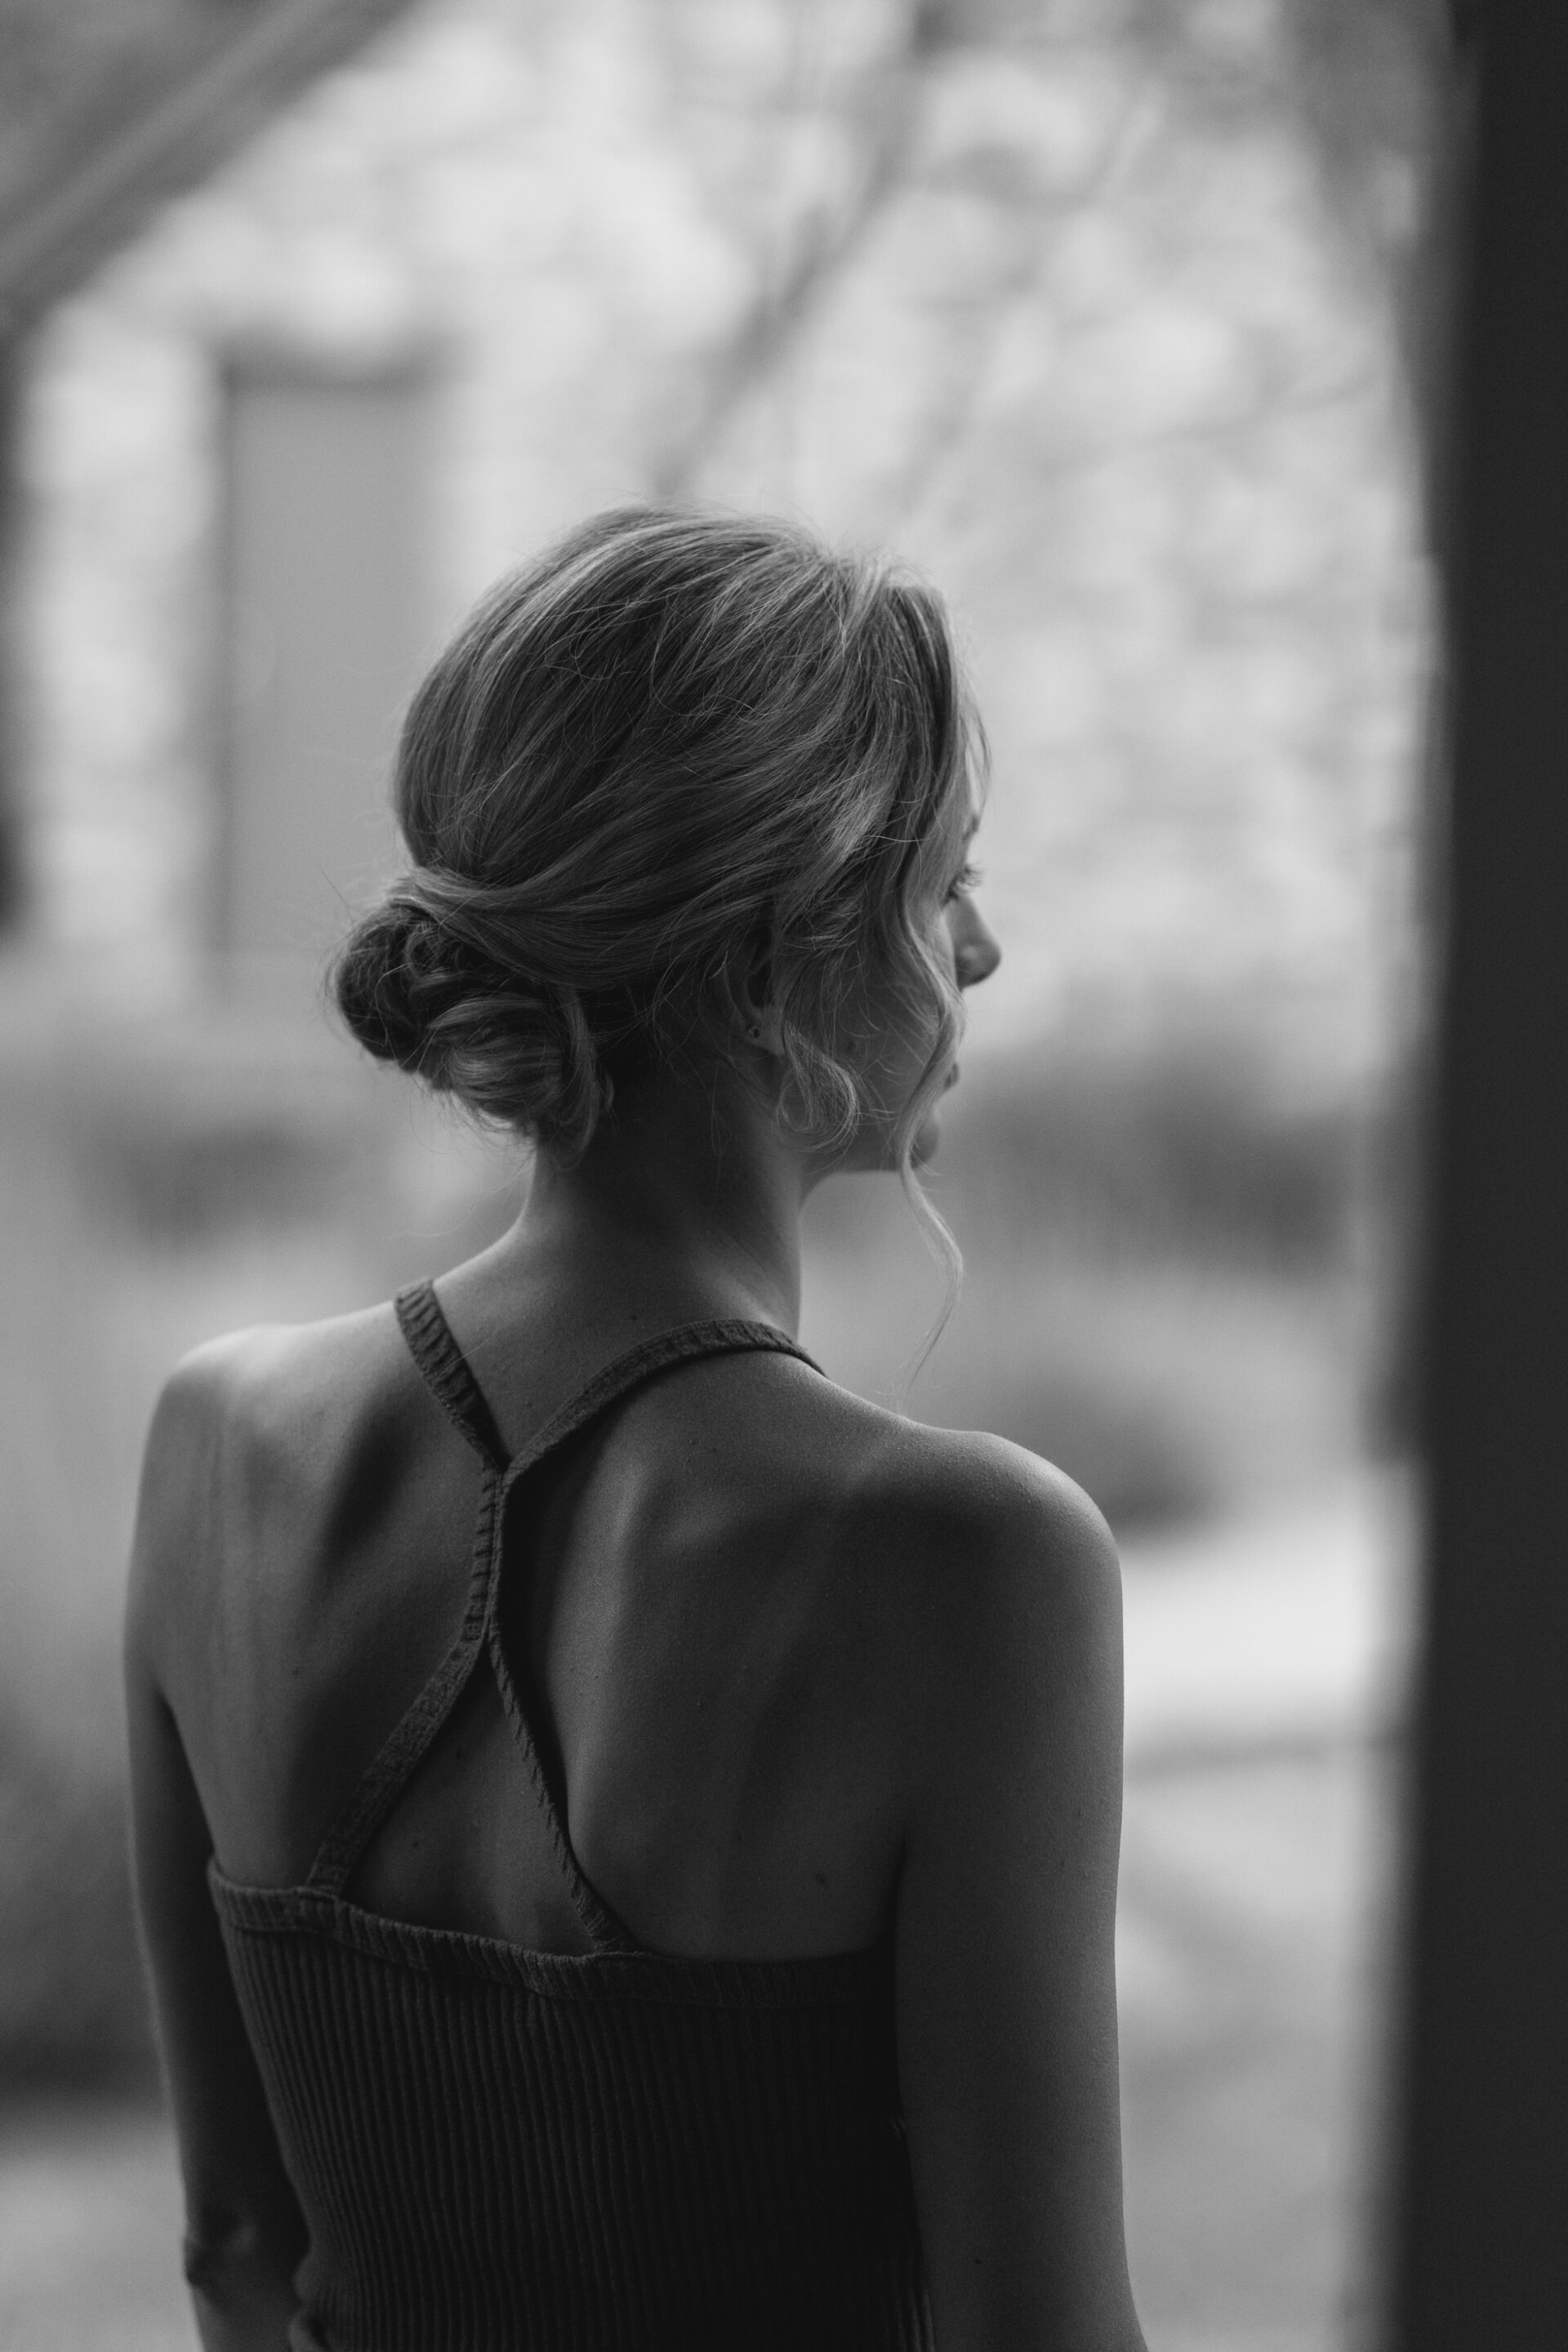 The bride has a moment of contemplation as she gets ready for her wedding